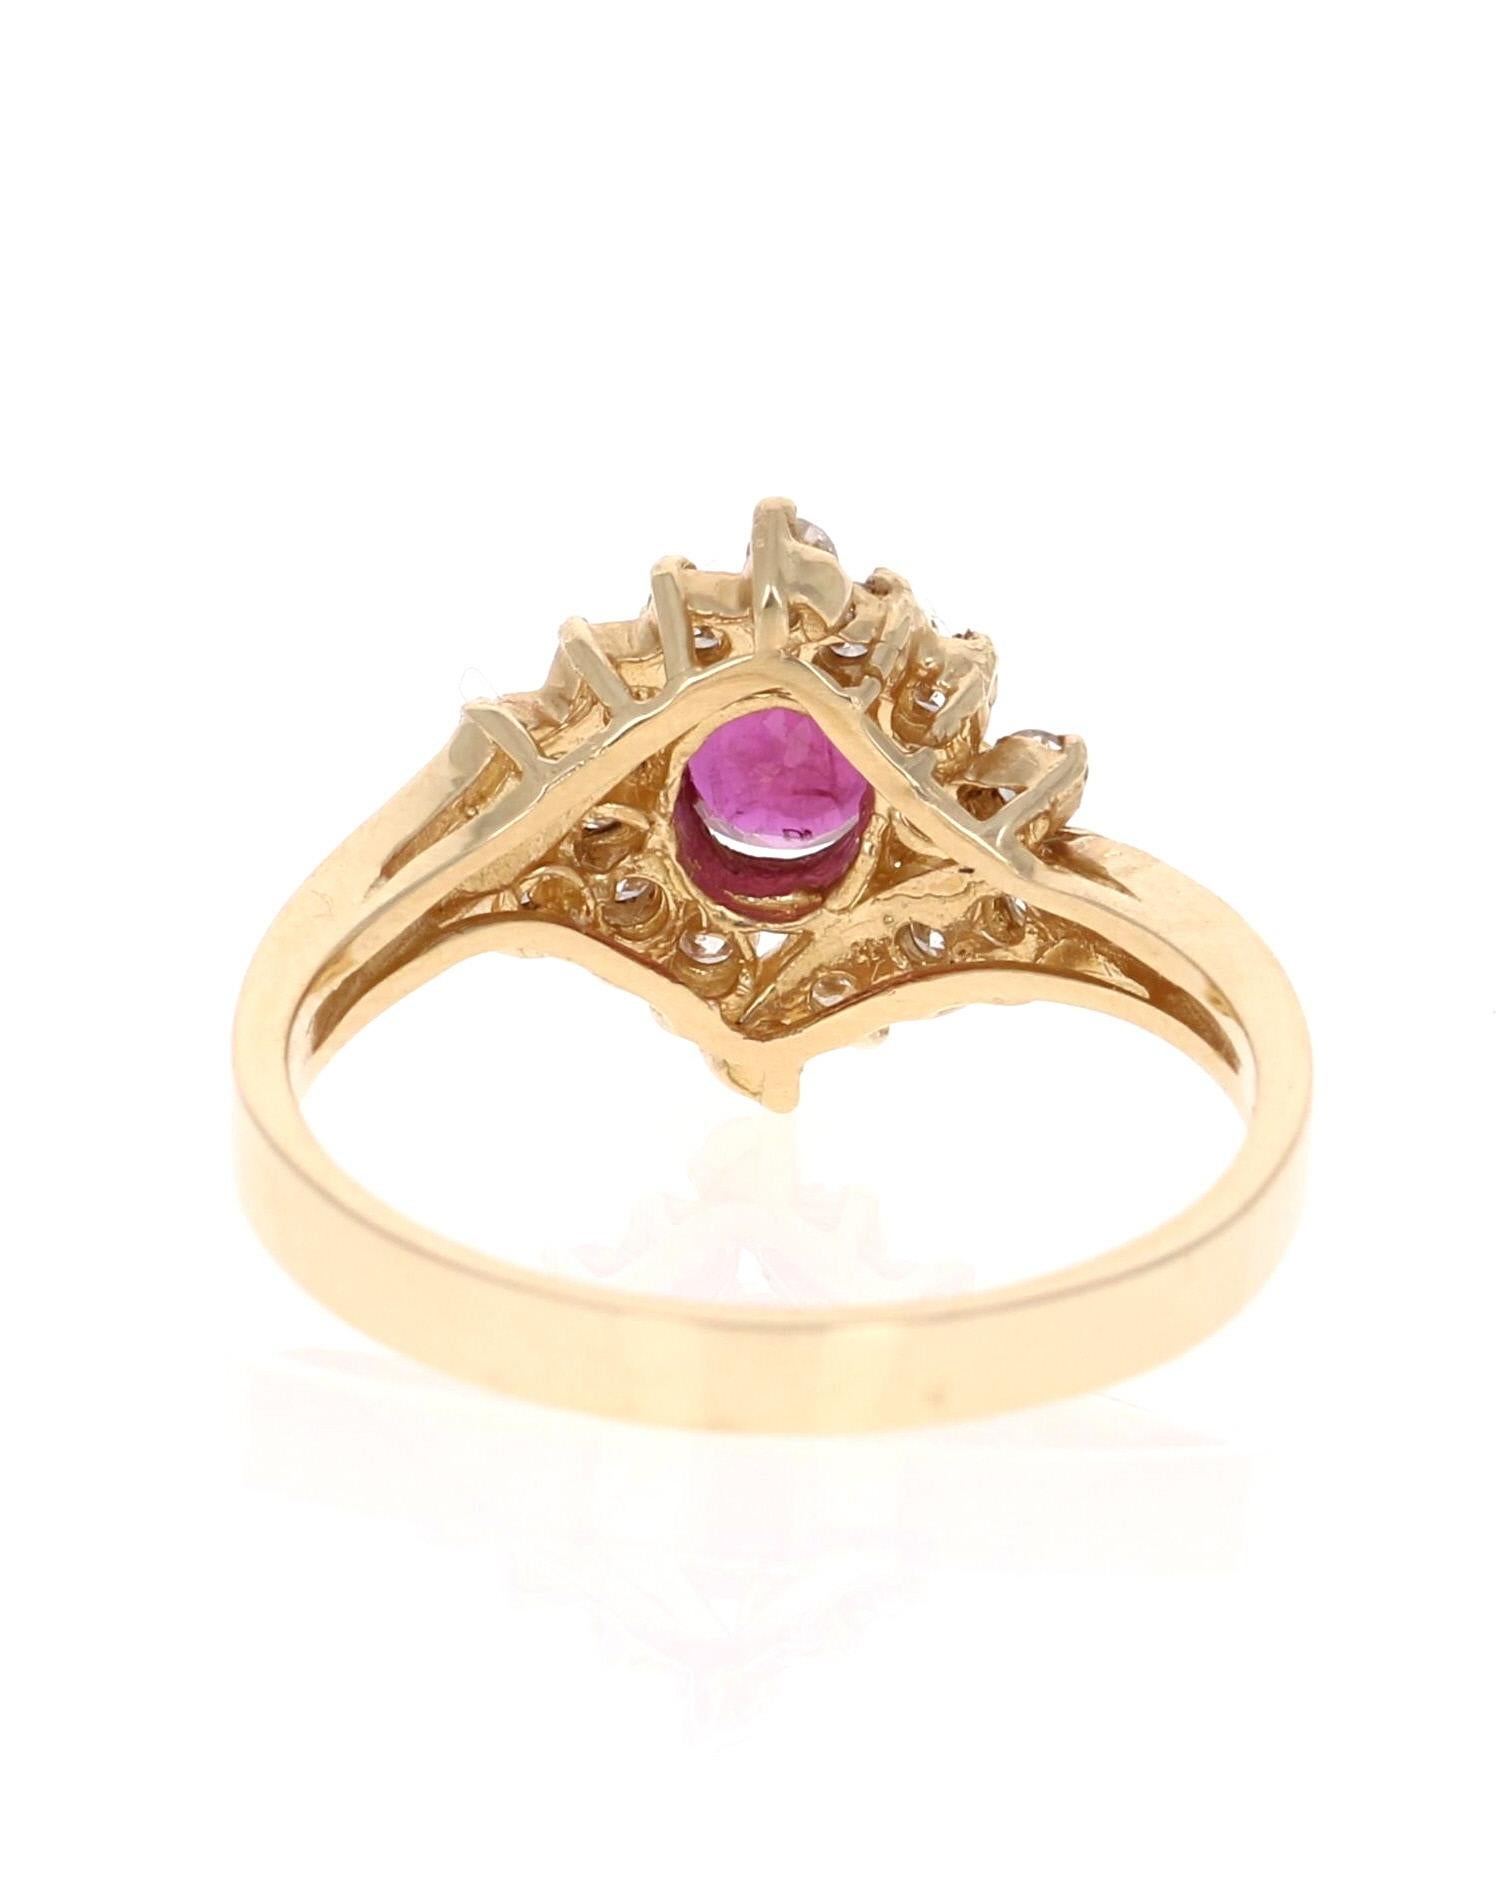 1.06 Carat Oval Cut Burmese Ruby Diamond 14 Karat Yellow Gold Ring In New Condition For Sale In Los Angeles, CA